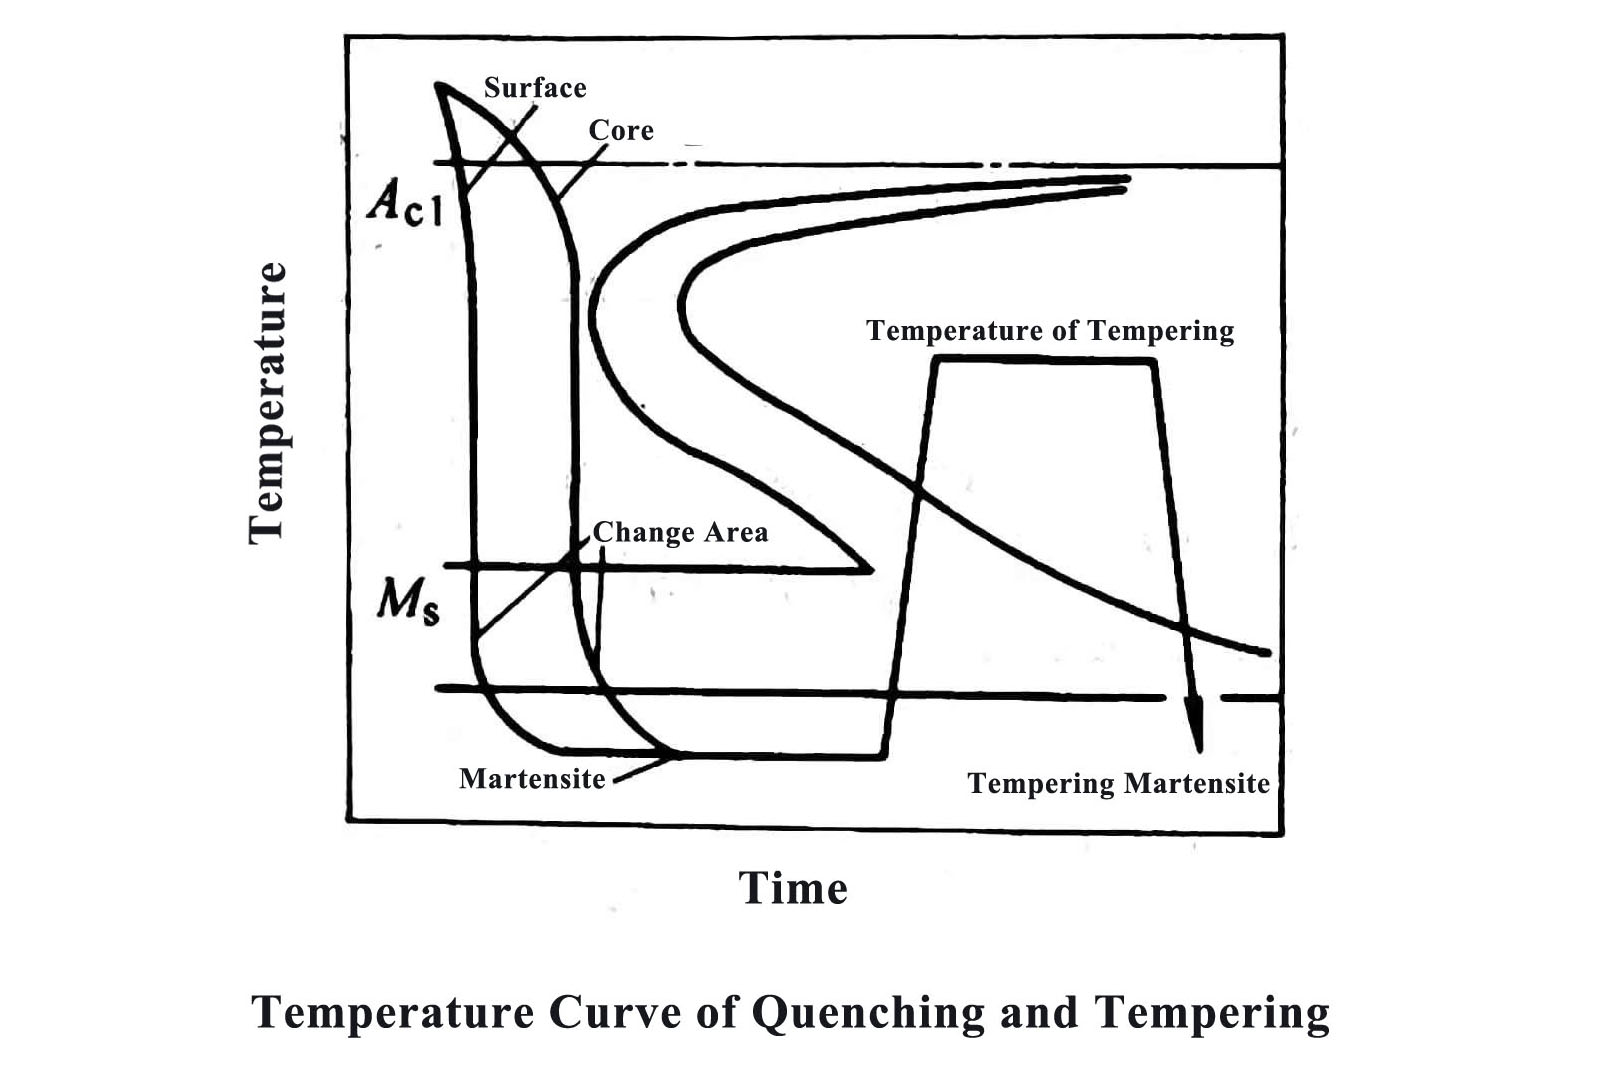 Temperature Curve of Quenching and Tempering